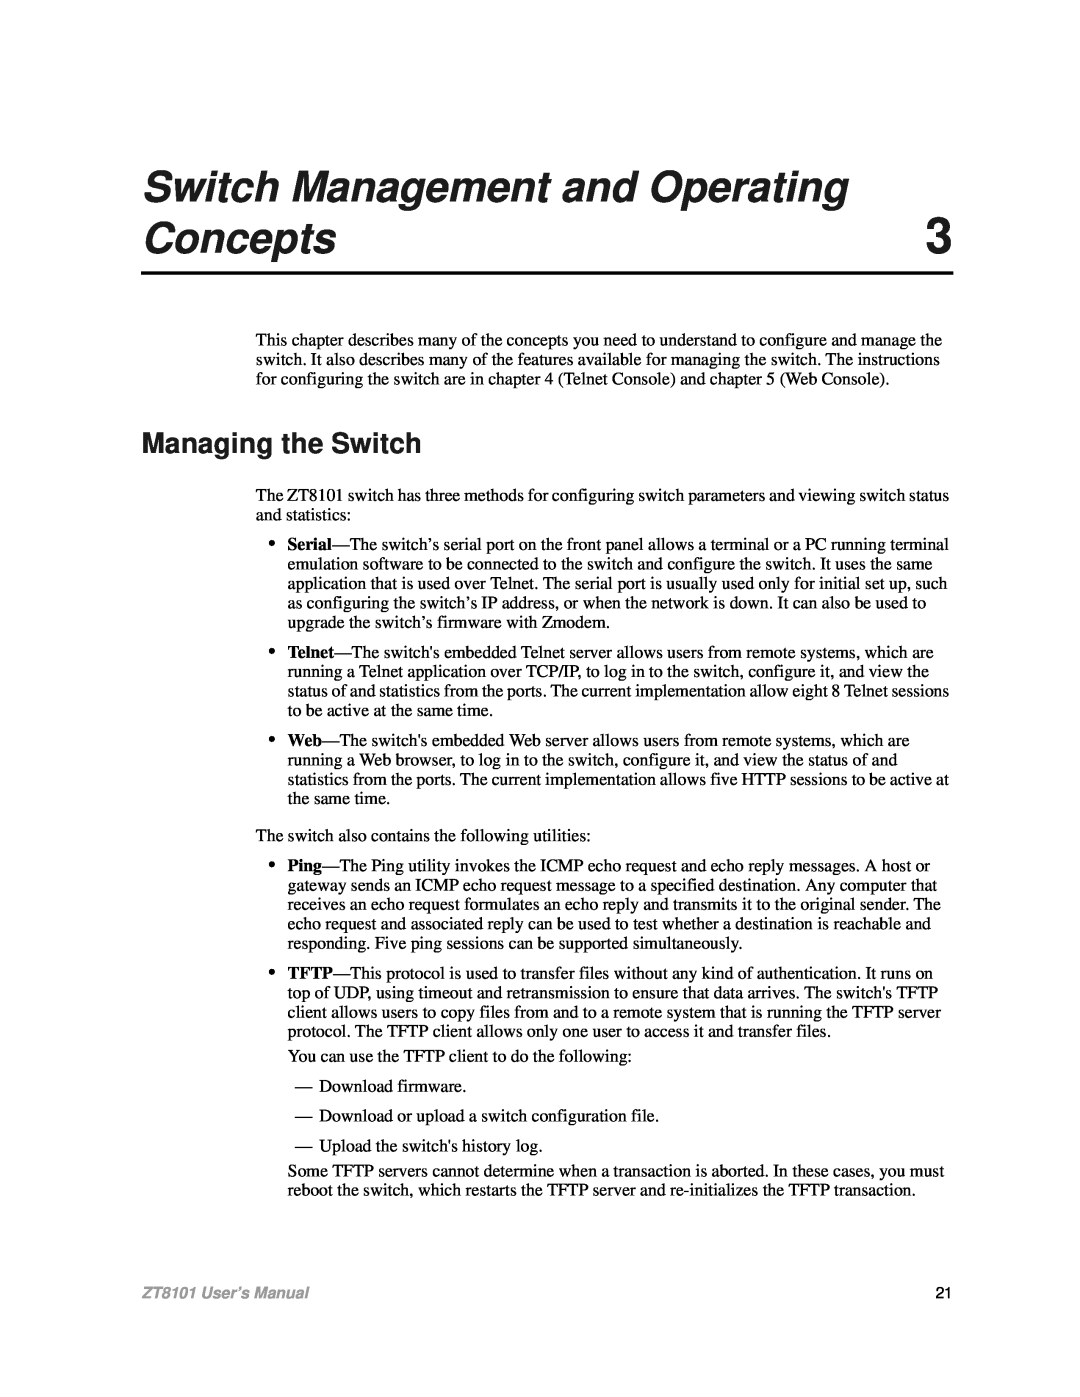 Intel ZT8101 user manual Switch Management and Operating, Concepts, Managing the Switch 